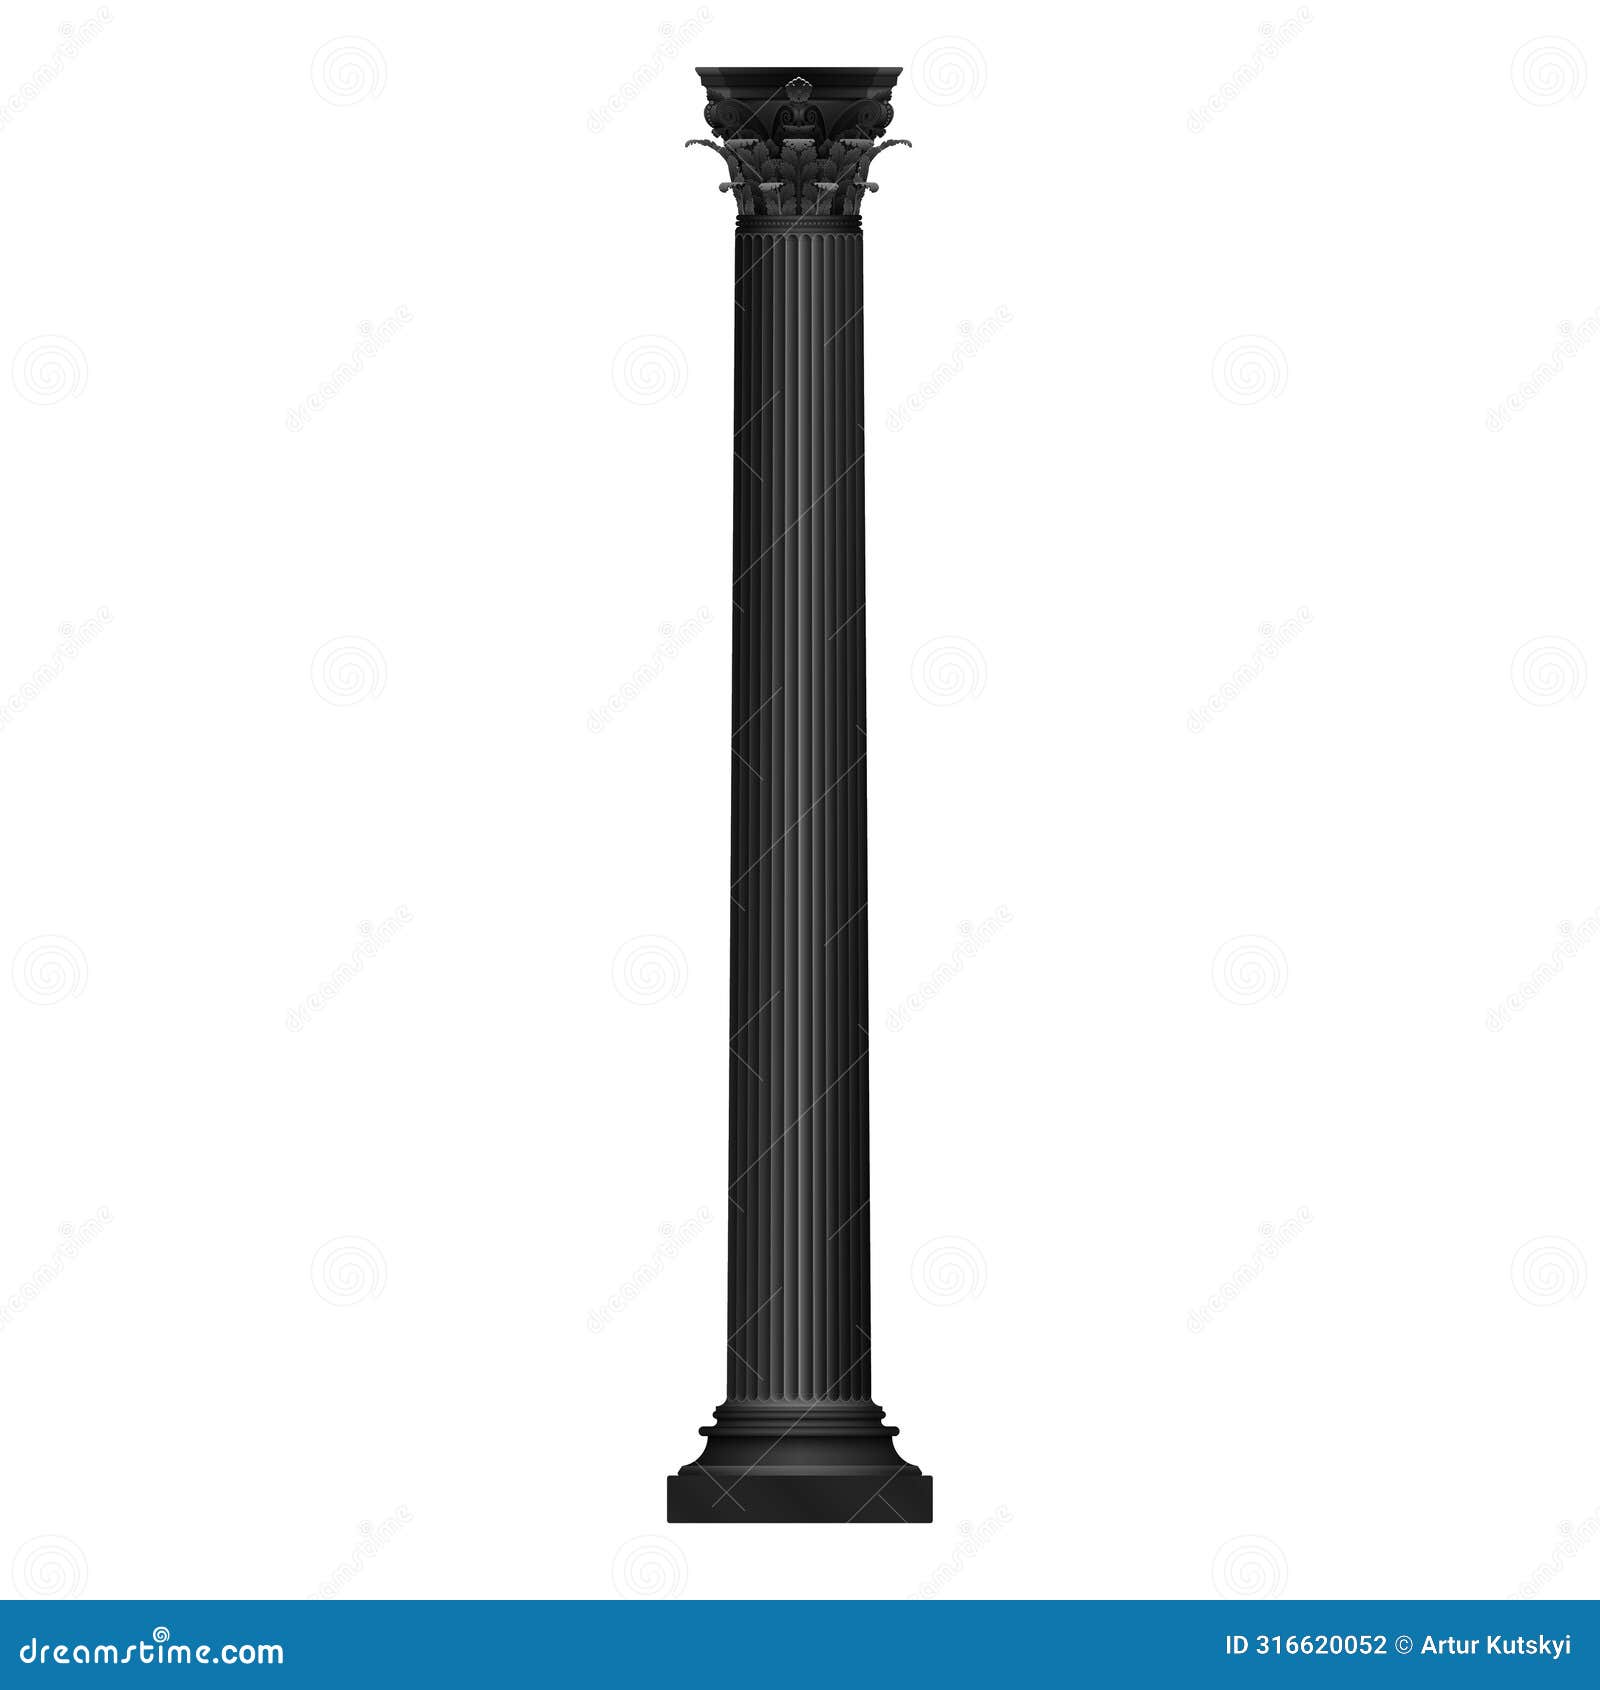 ancient column black glyph icon, old traditional building support